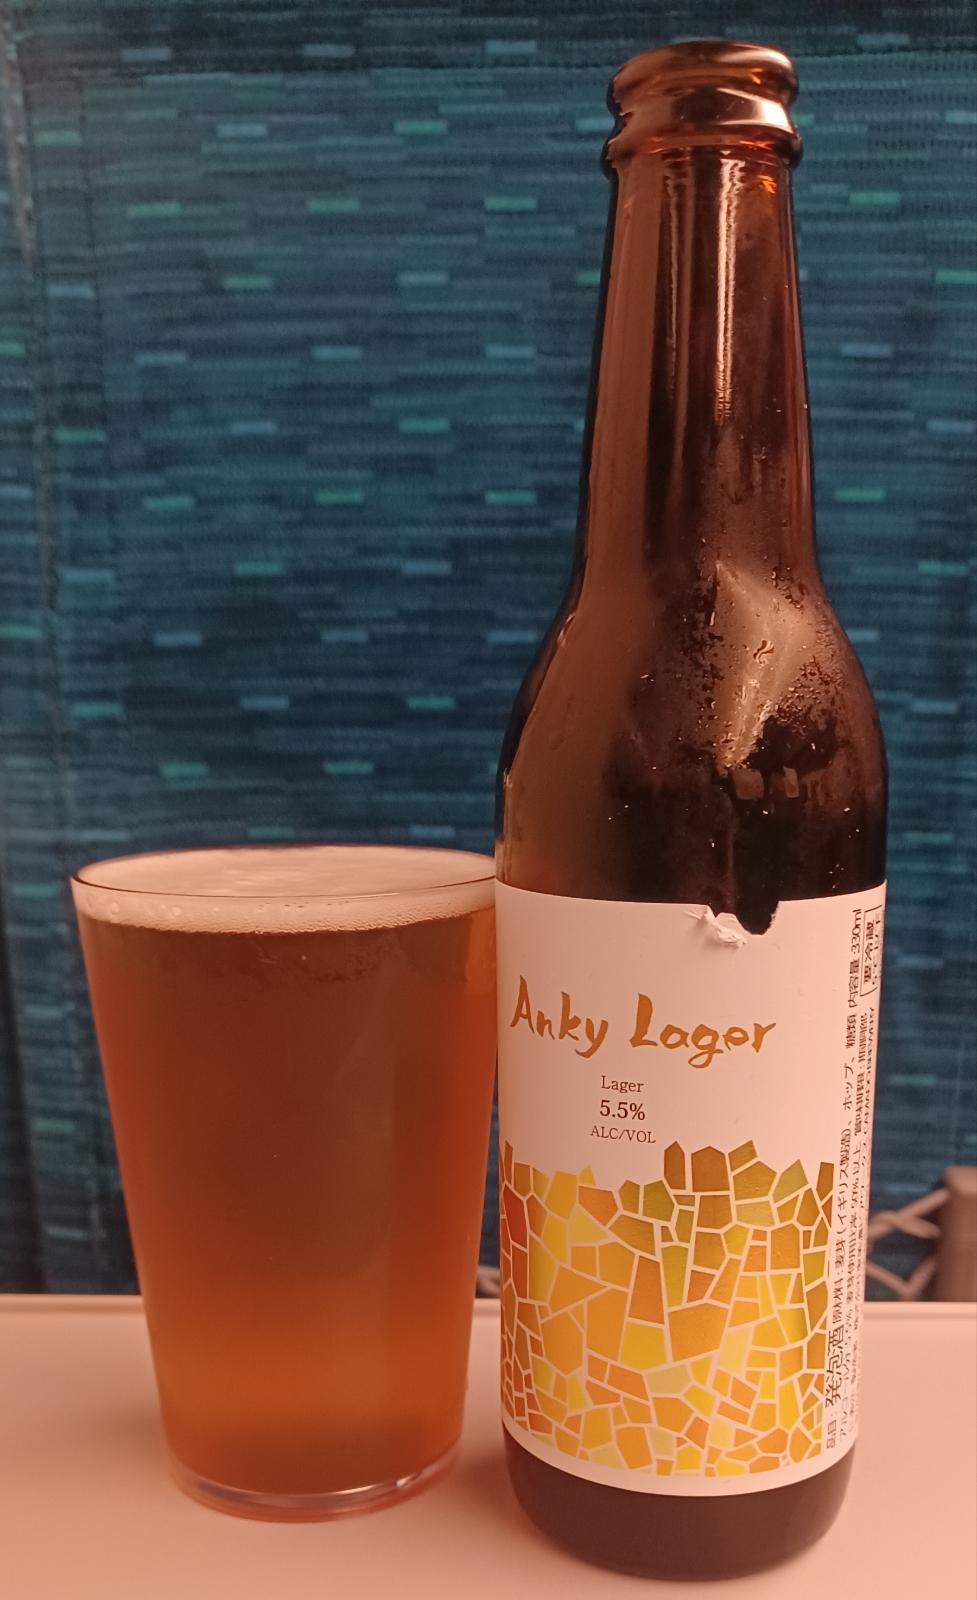 Anky Lager